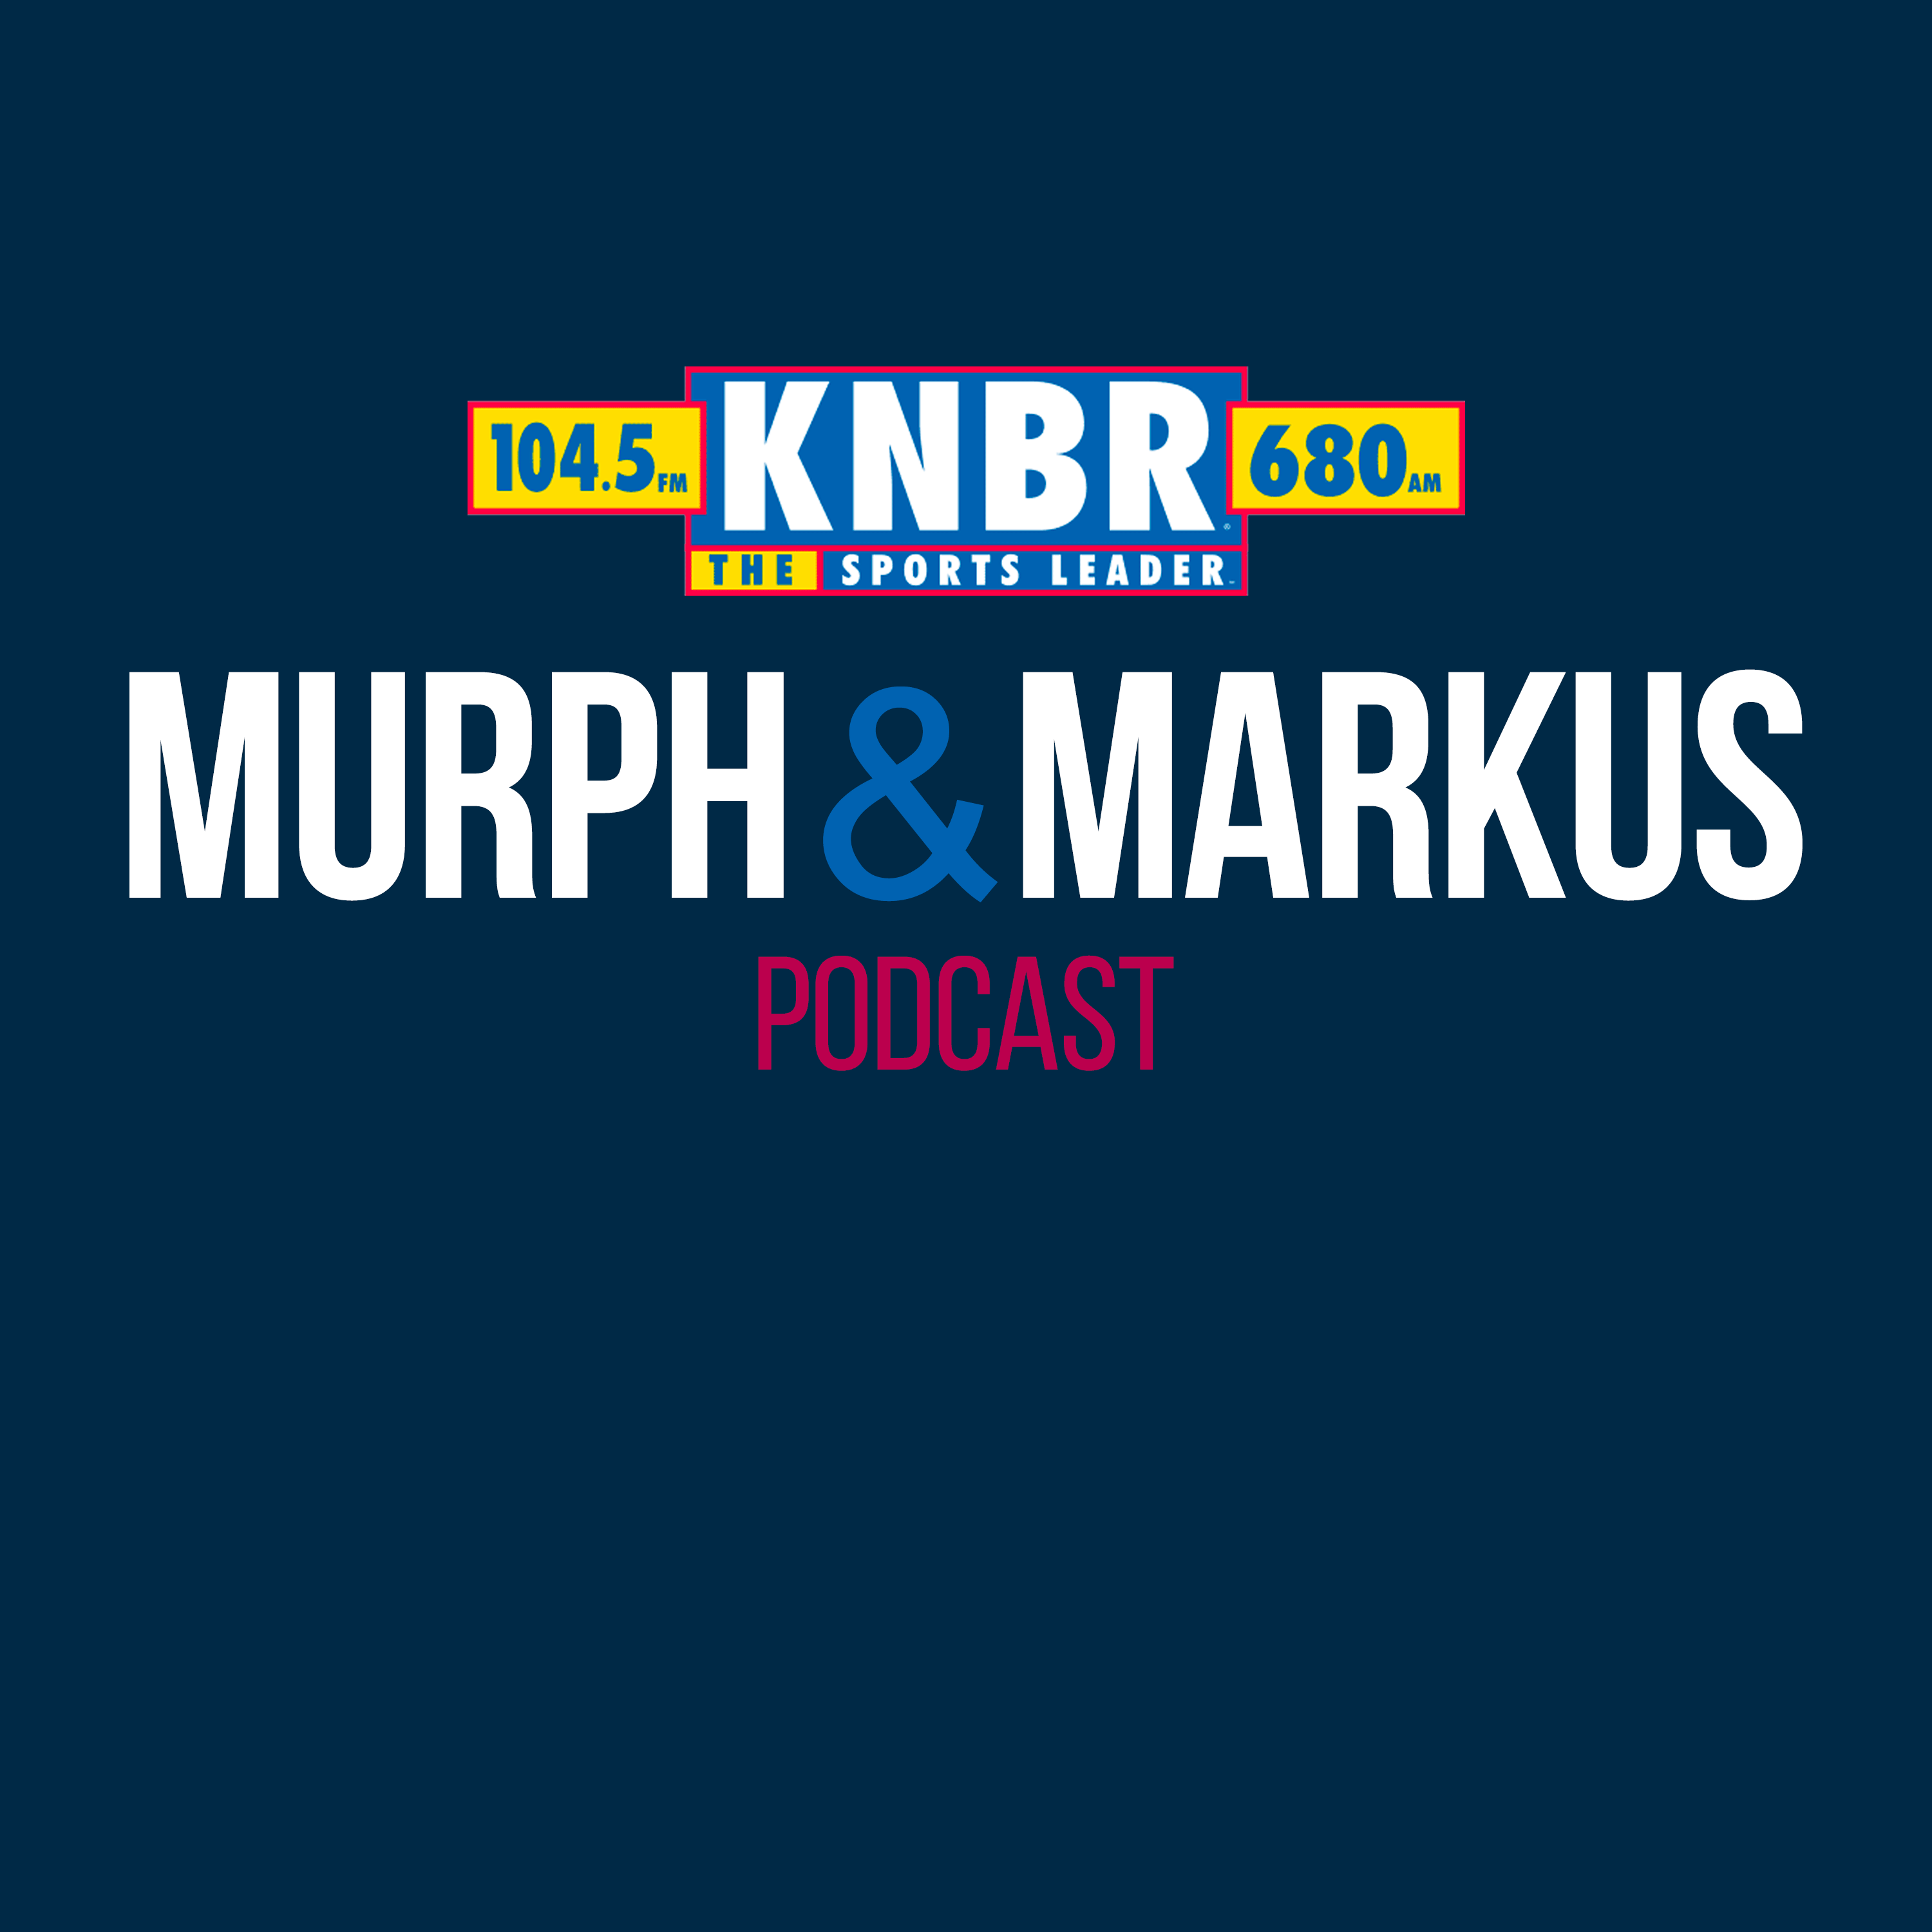 12-15 John Lynch joins Murph & Markus to discuss this week's matchup, injury updates, Purdy's contract, and his winning jacket